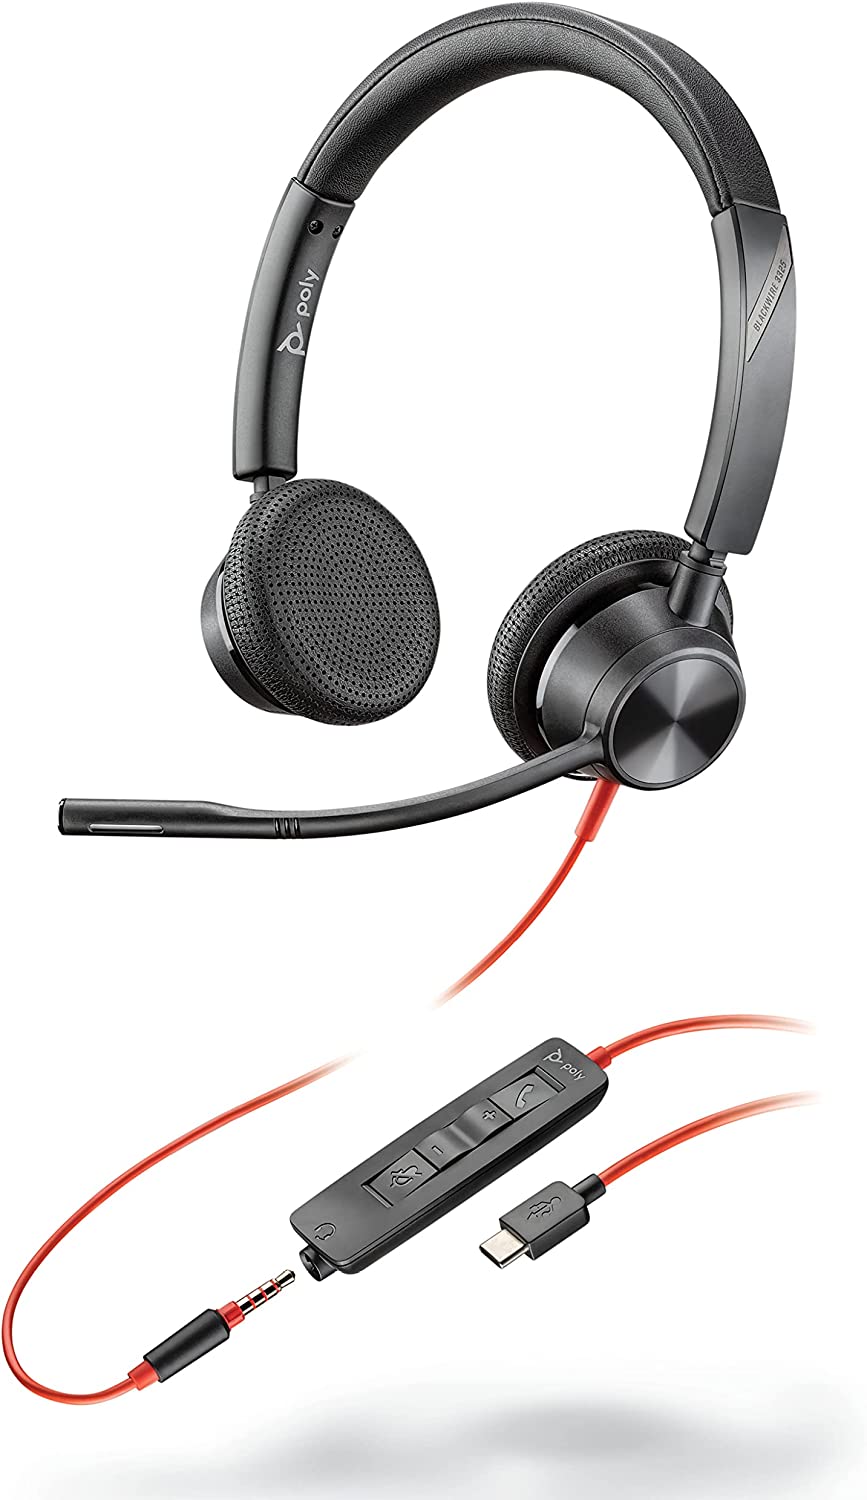 Poly Plantronics - Blackwire 3325 - Wired, Dual-Ear (Stereo) Headset with Boom Mic - USB-A/3.5mm to connect to your PC and/or Mac - Works with Teams (Certified), Zoom &amp; more Medium Dual-Ear